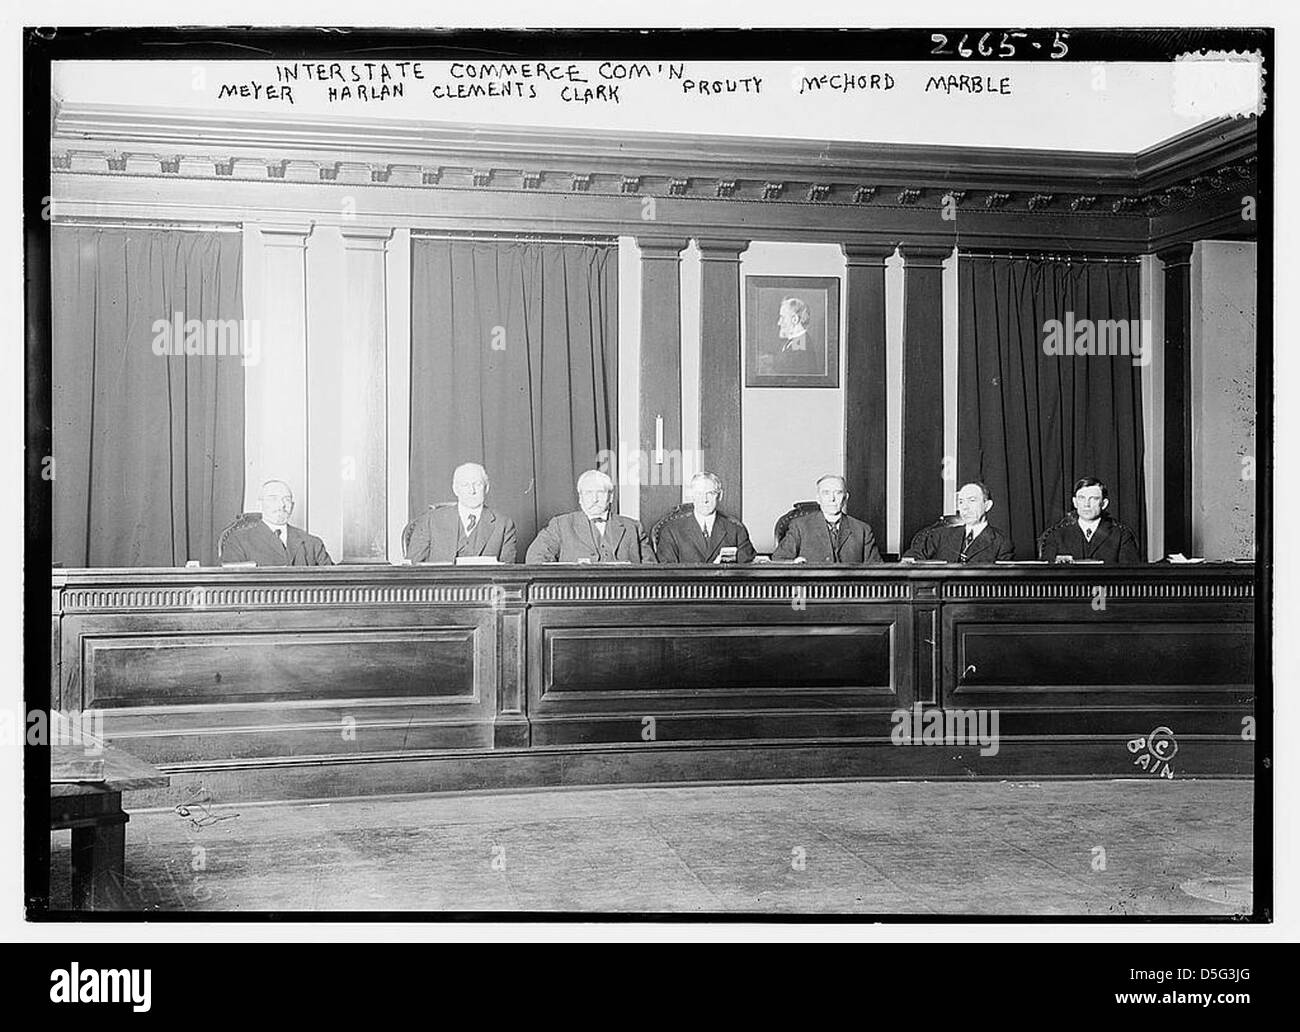 Interstate Commerce Com'n, Meyer, Harlan, Clements, Clark, Prouty, McChord, Marble (LOC) Stock Photo